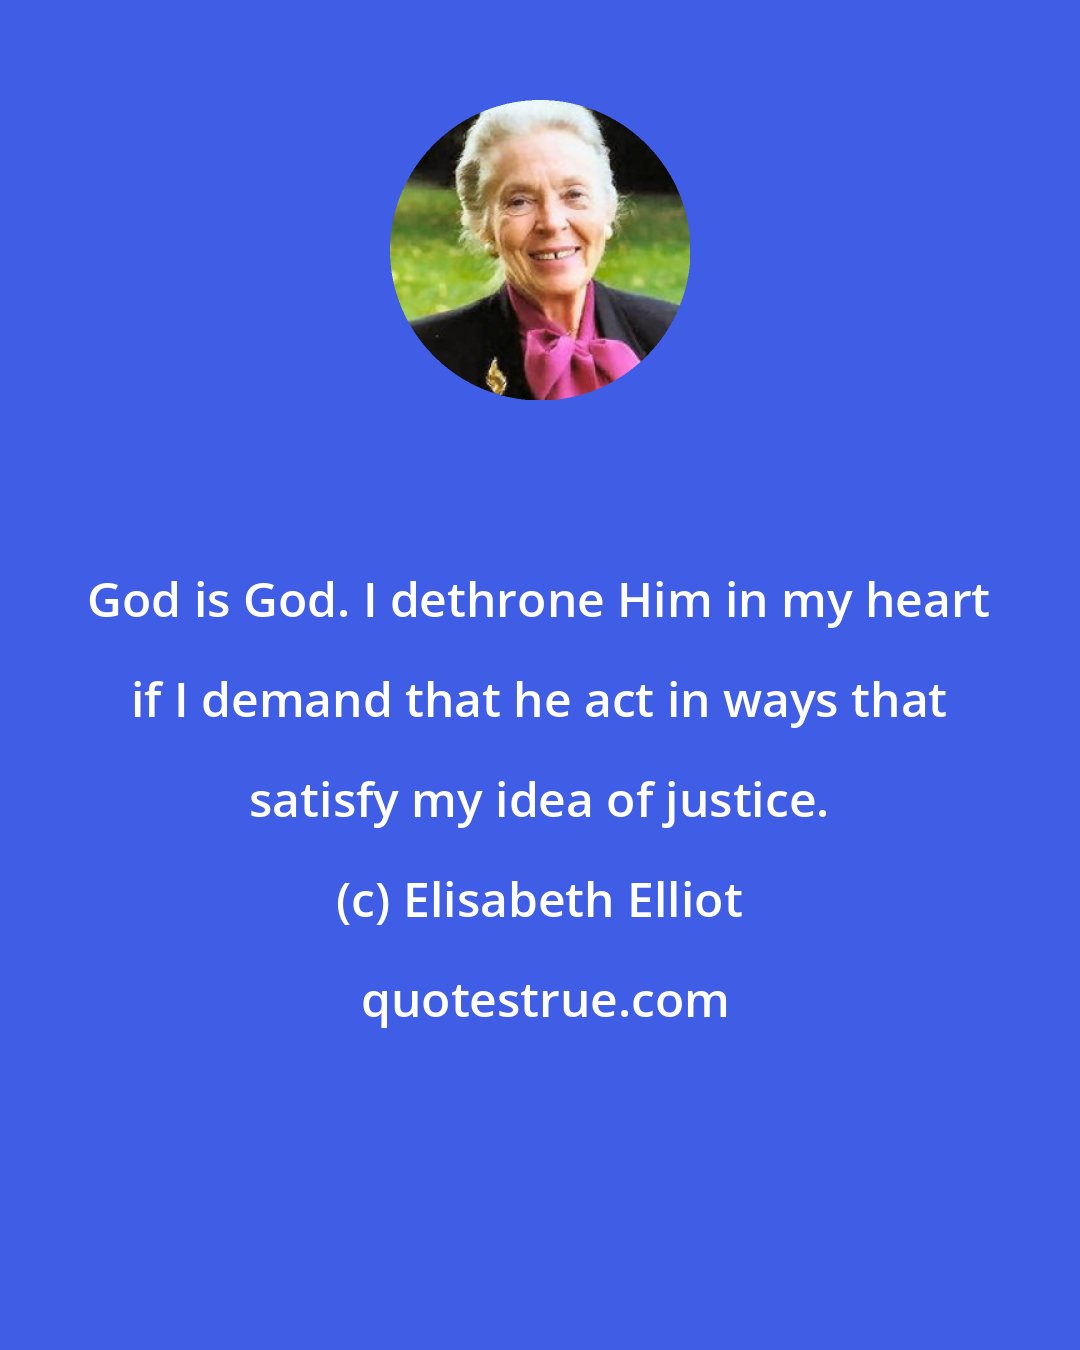 Elisabeth Elliot: God is God. I dethrone Him in my heart if I demand that he act in ways that satisfy my idea of justice.